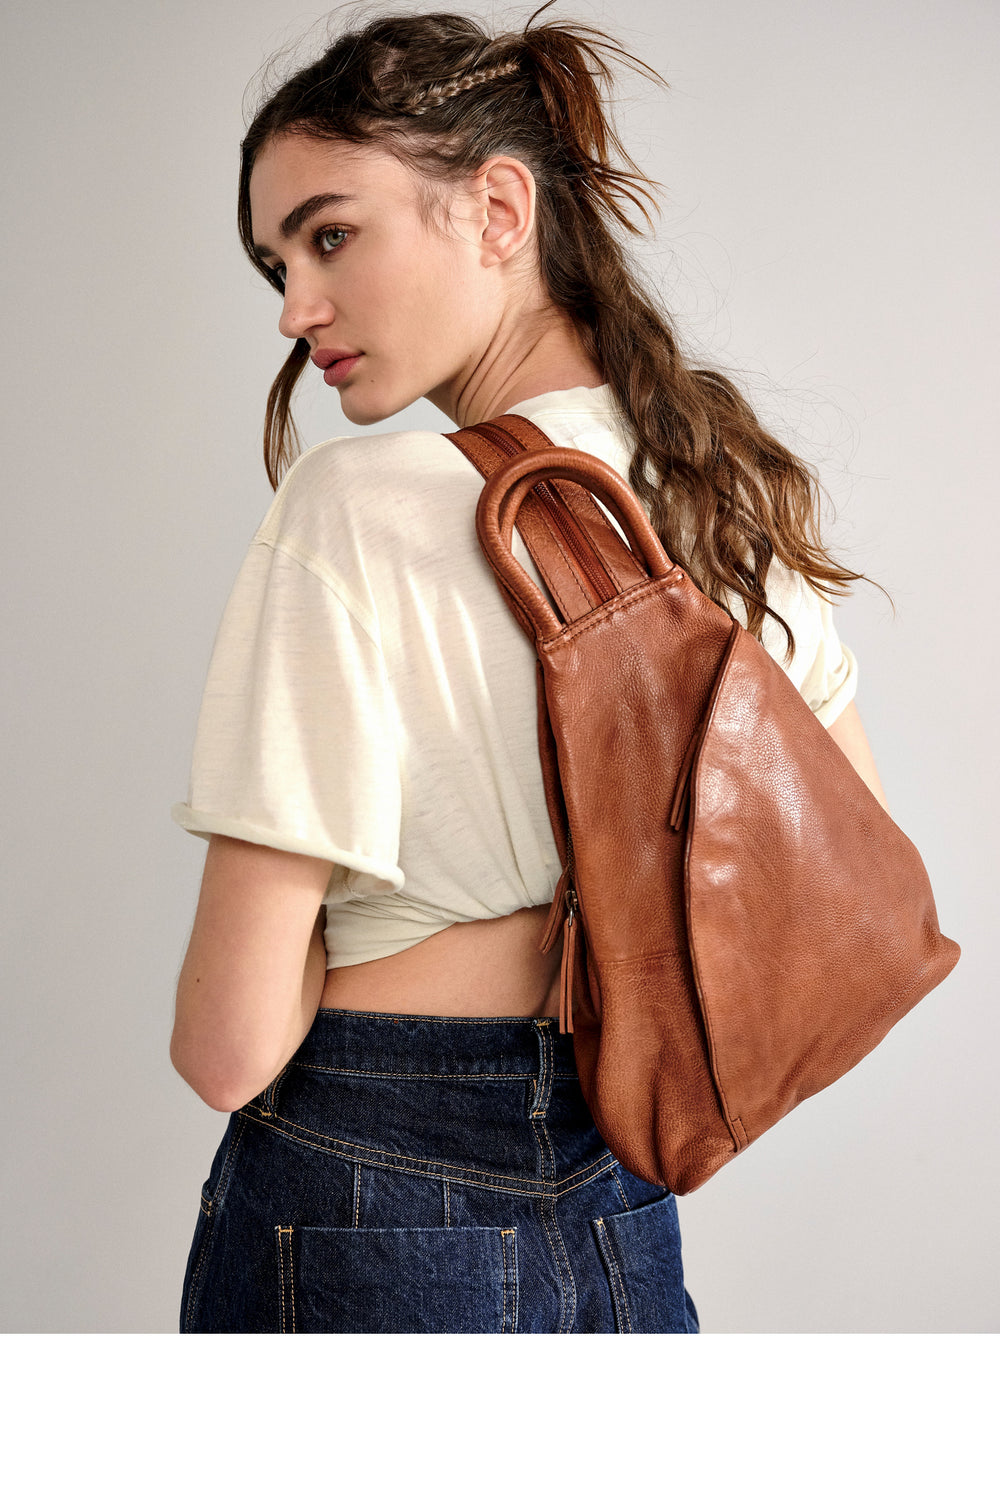 Make a statement wherever you go with the Free People WTF Soho Convertible Leather Bag! This bag is like a chameleon, quickly converting from a stylish sling bag to an edgy backpack with adjustable straps and zipper closures. And you'll look cool no matter how you wear it. Your style just leveled up!